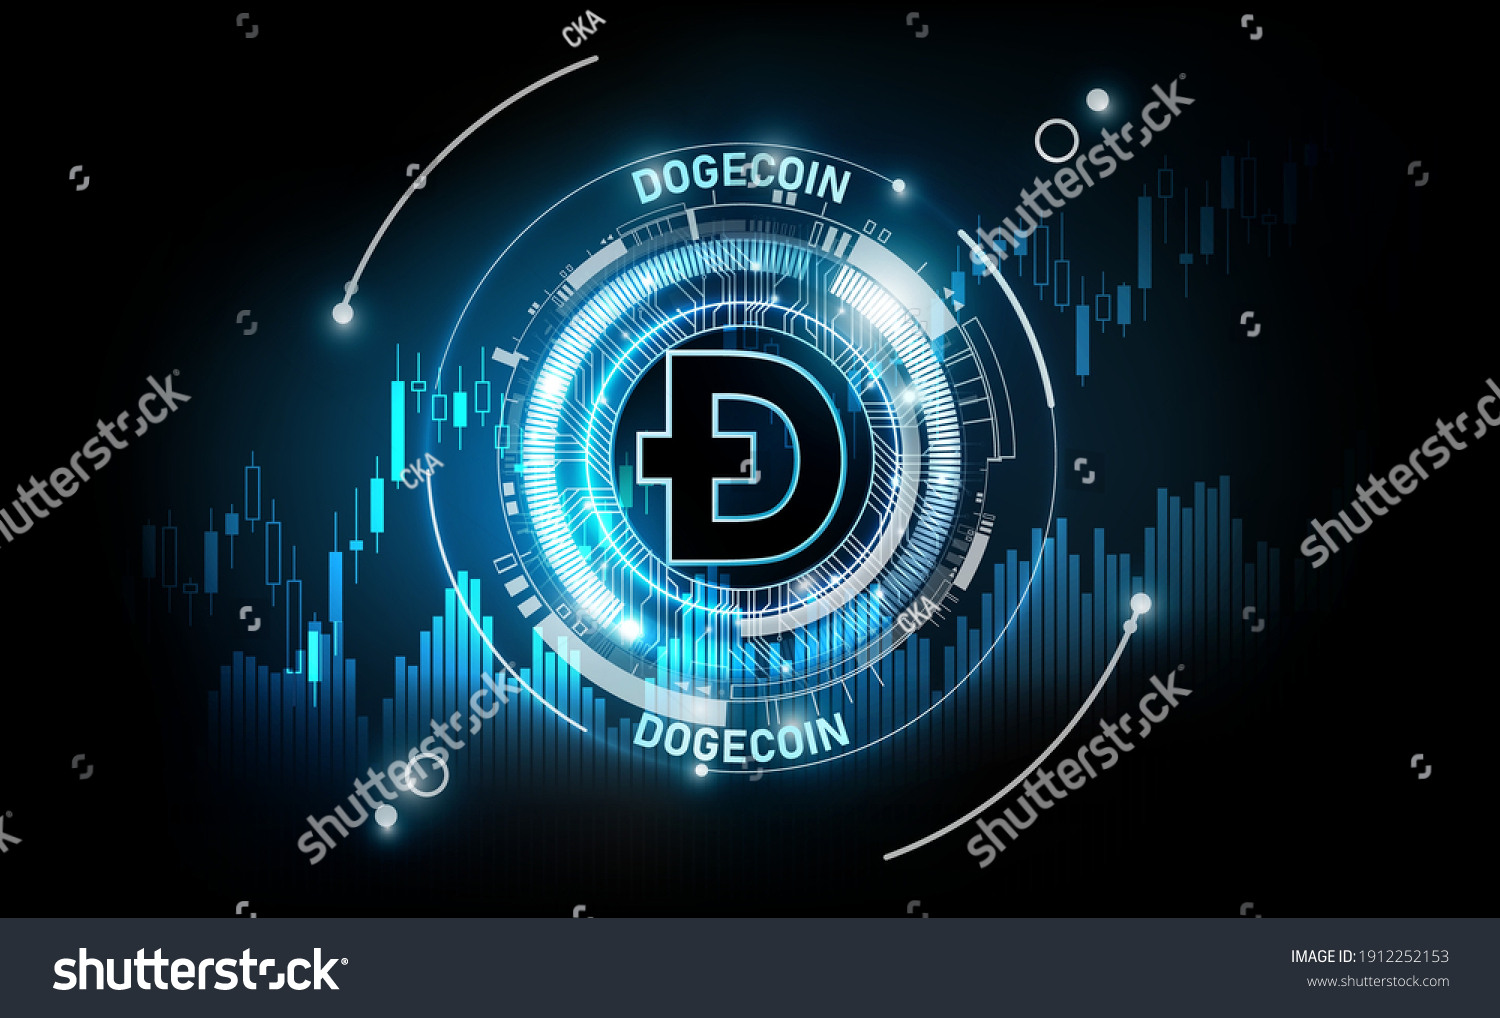 SVG of Dogecoin digital currency, futuristic digital money on financial chart, Doge, Dogecoin technology abstract background concept, vector illustration svg